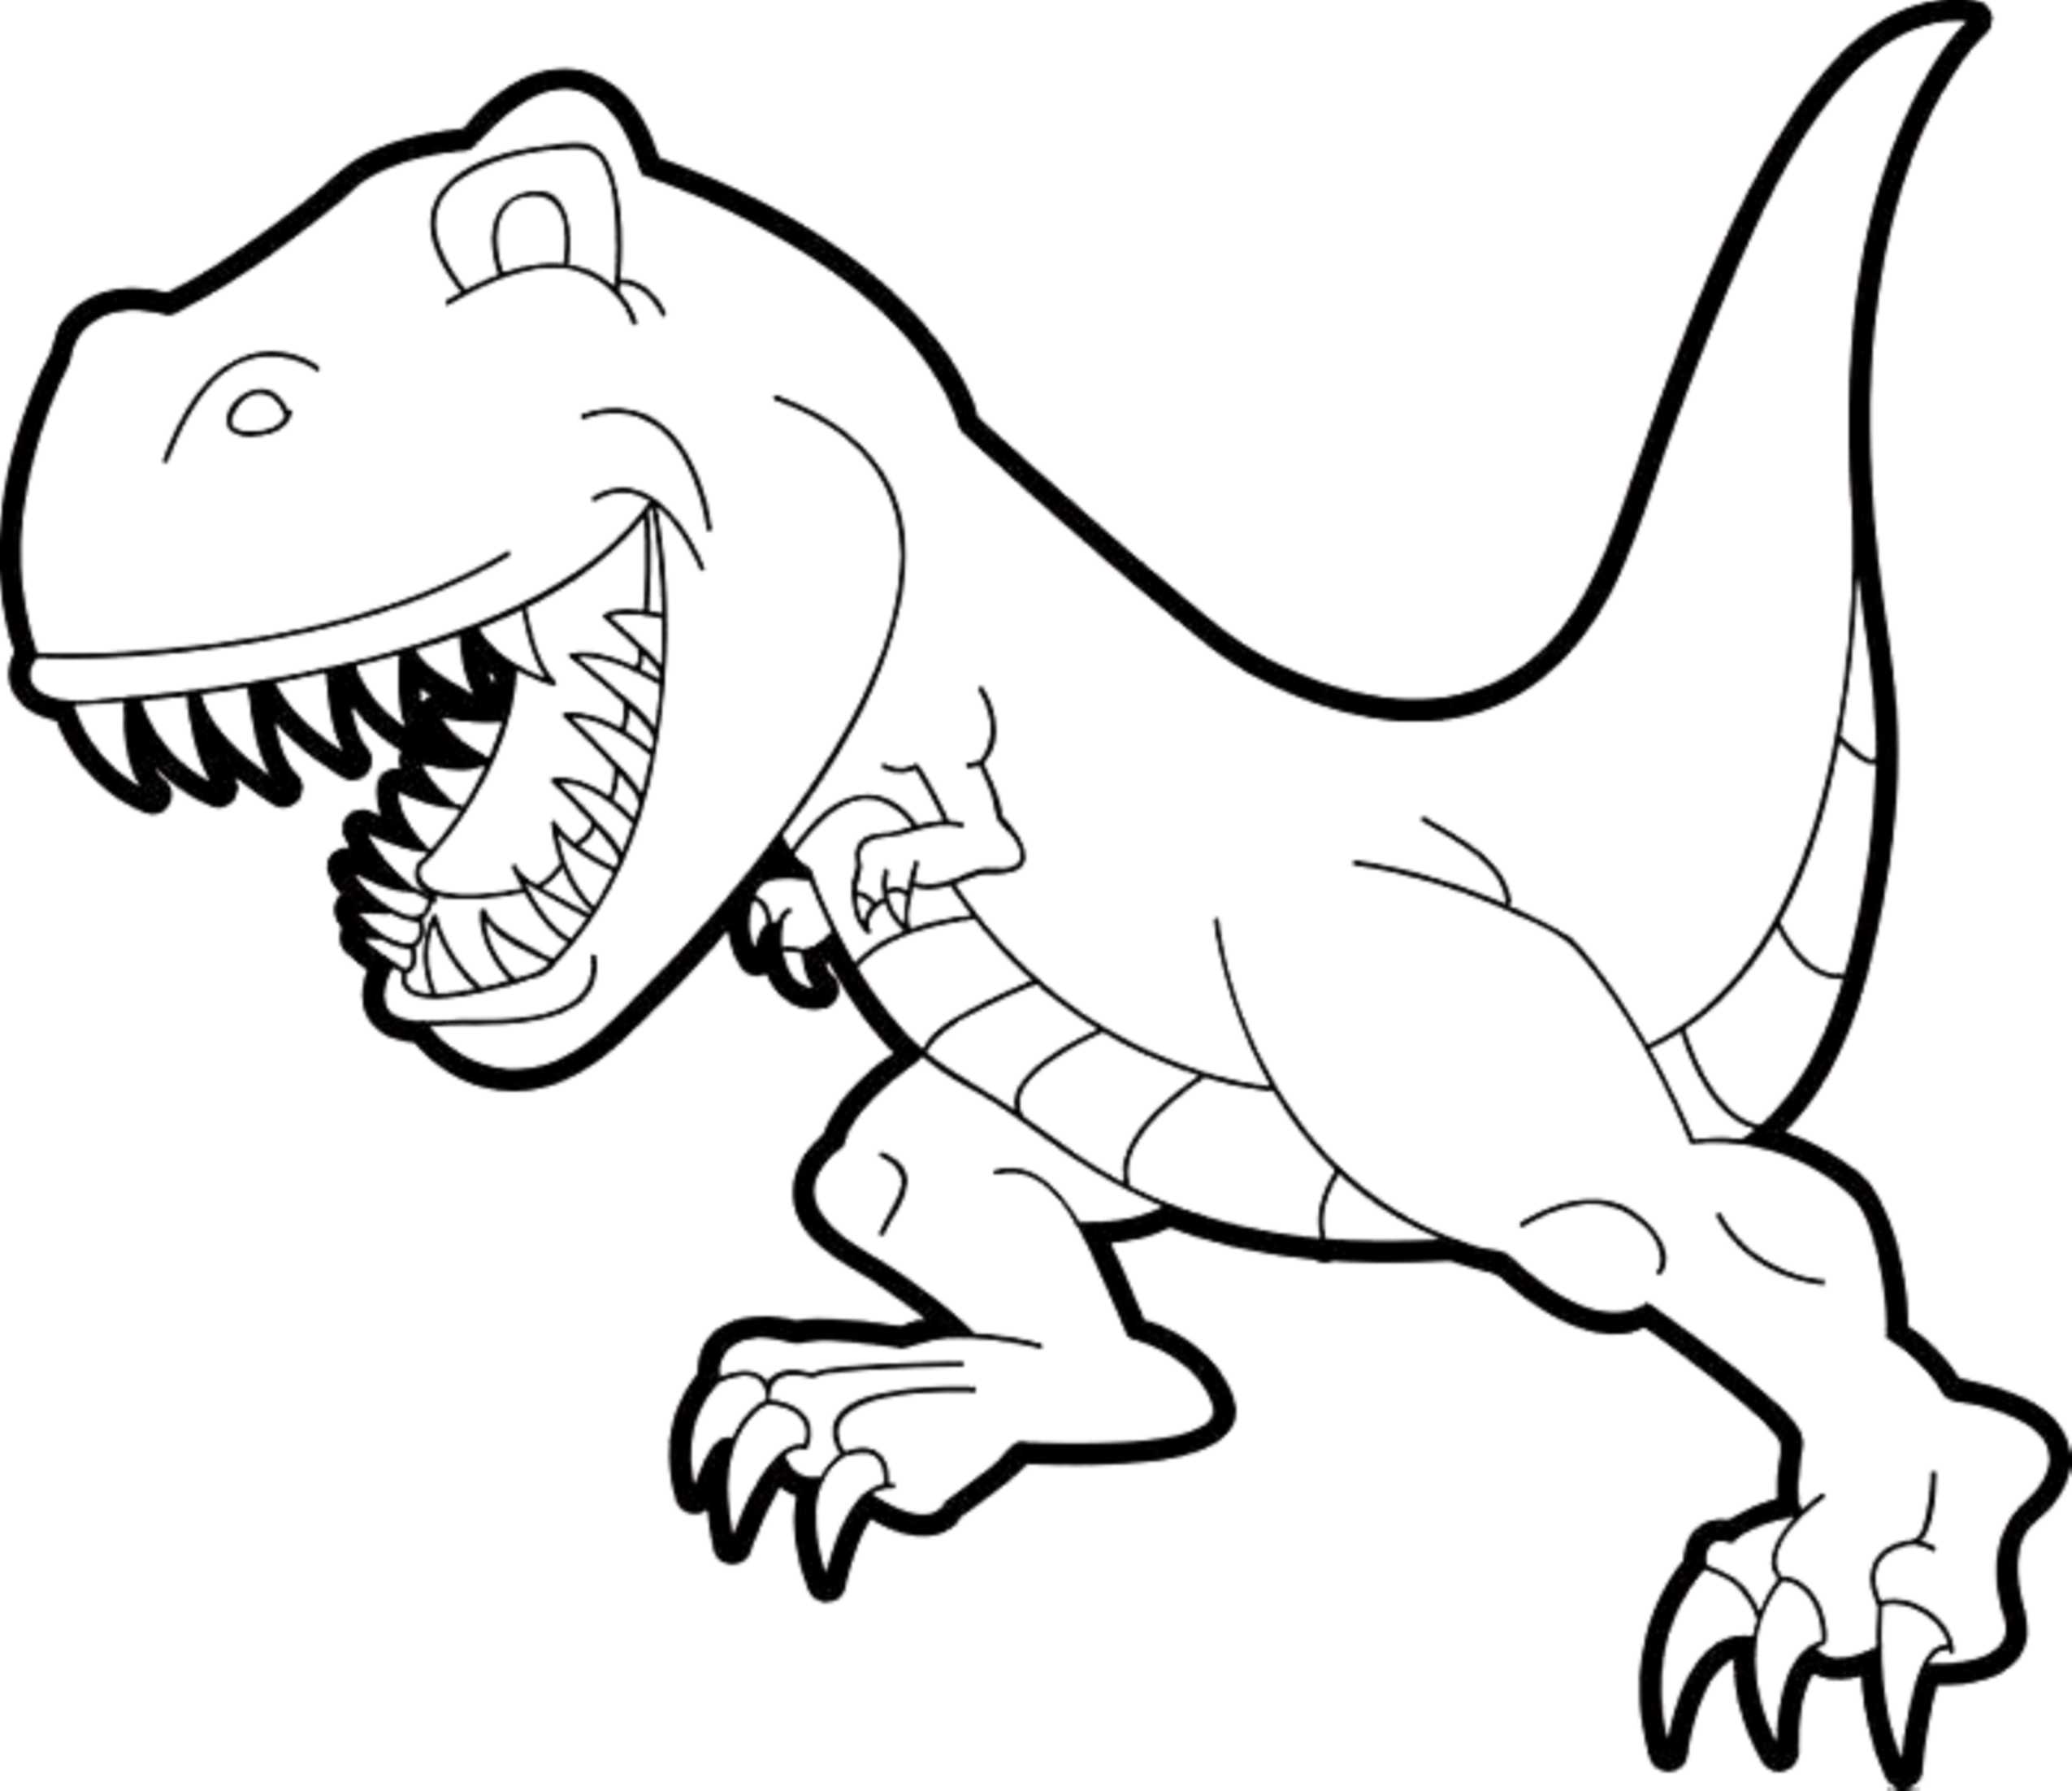 Print Download Dinosaur TRex Coloring Pages for Kids